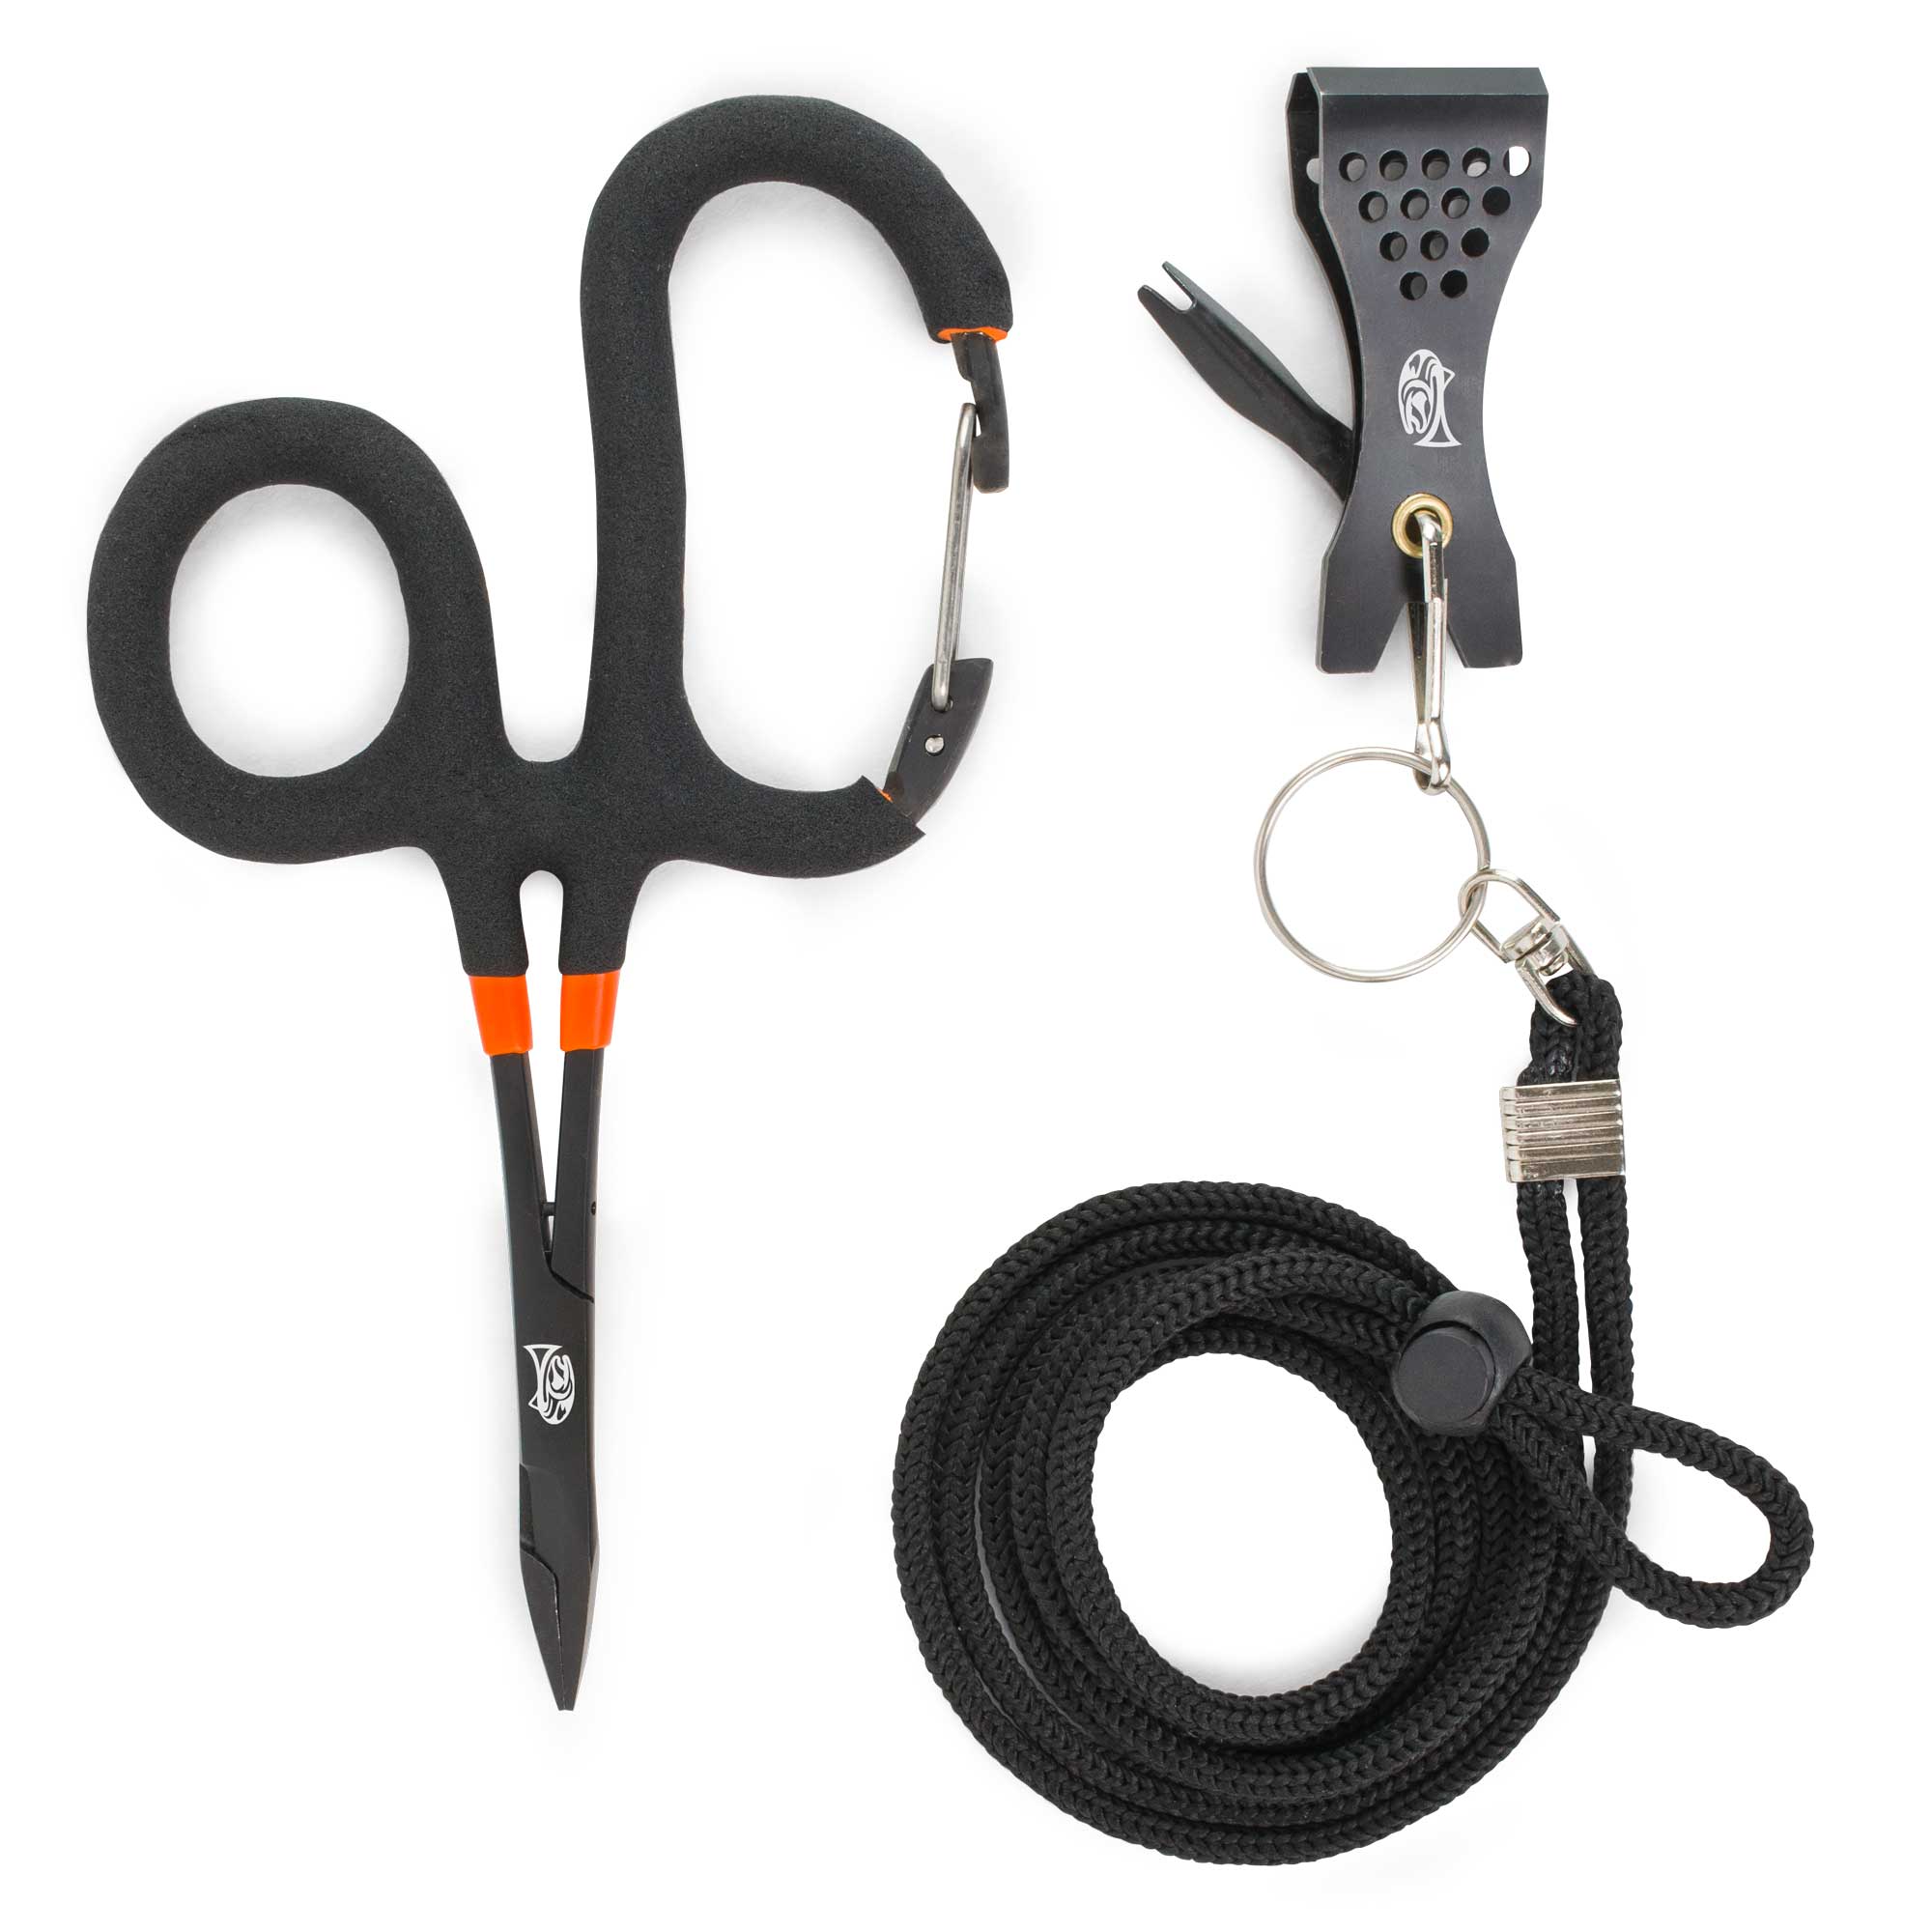 Hook-Eze Fishing Knot Tying Tool and Zinger Retractor Combo | Stocking  Stuffers Gifts for Men, Fishing Gear and Equipment for Nippers, Forceps,  Fly